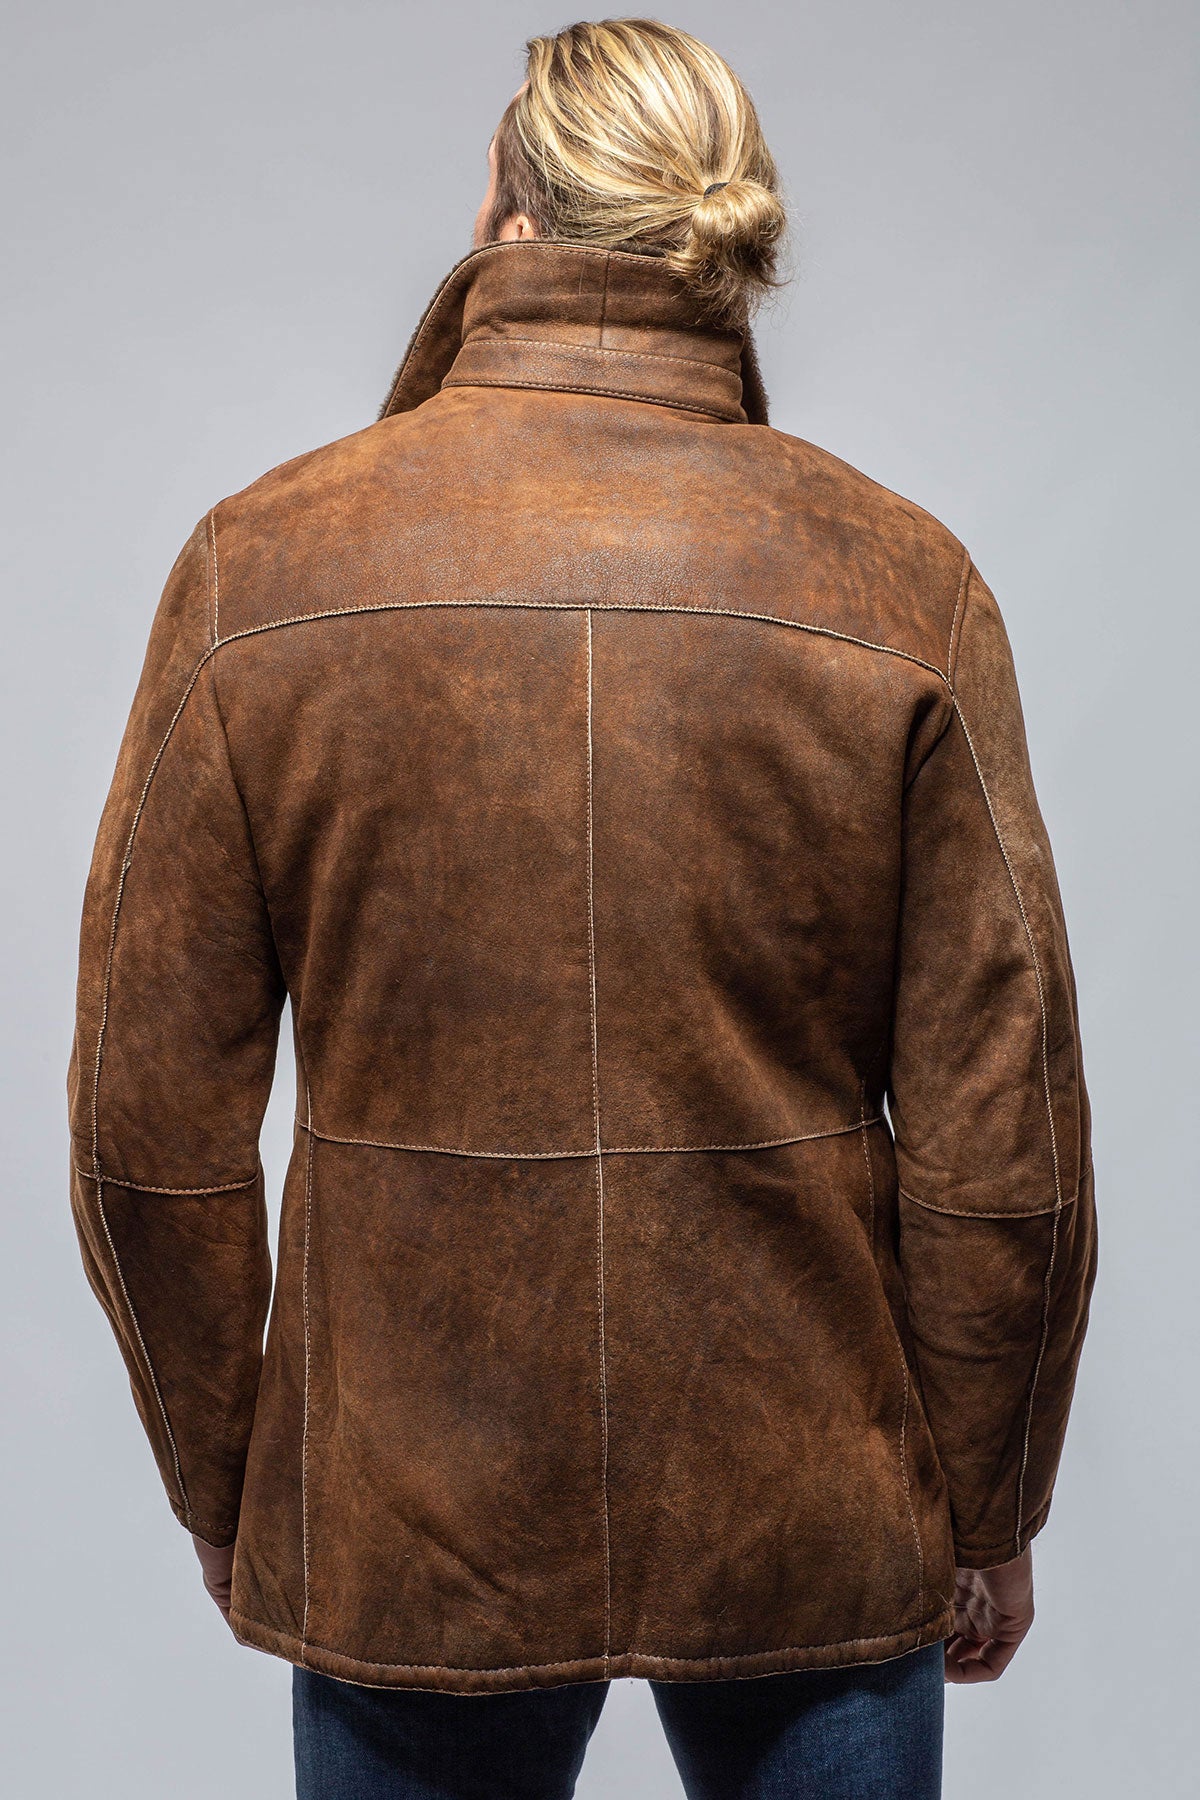 Deerfield Shearling | Samples - Mens - Outerwear - Shearling | Gimo's